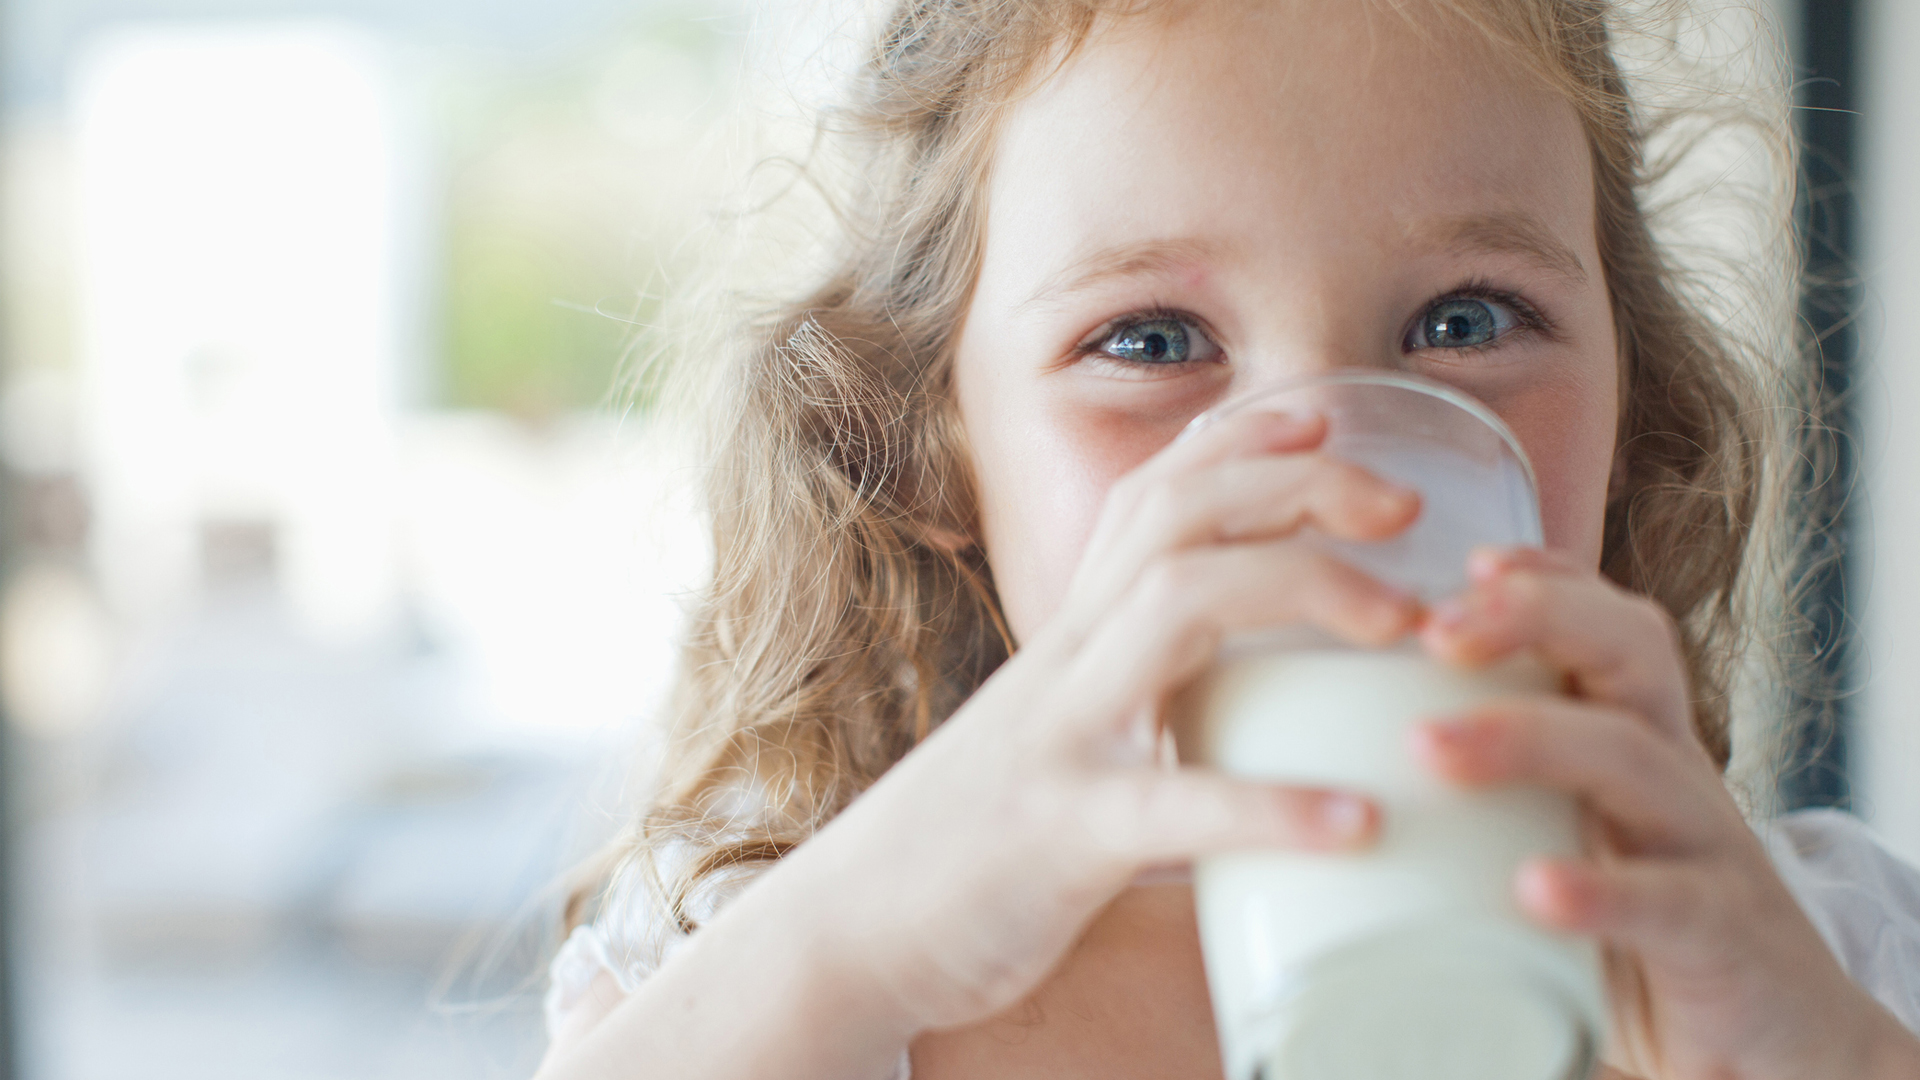 image shows a young girl drinking a glass of milk